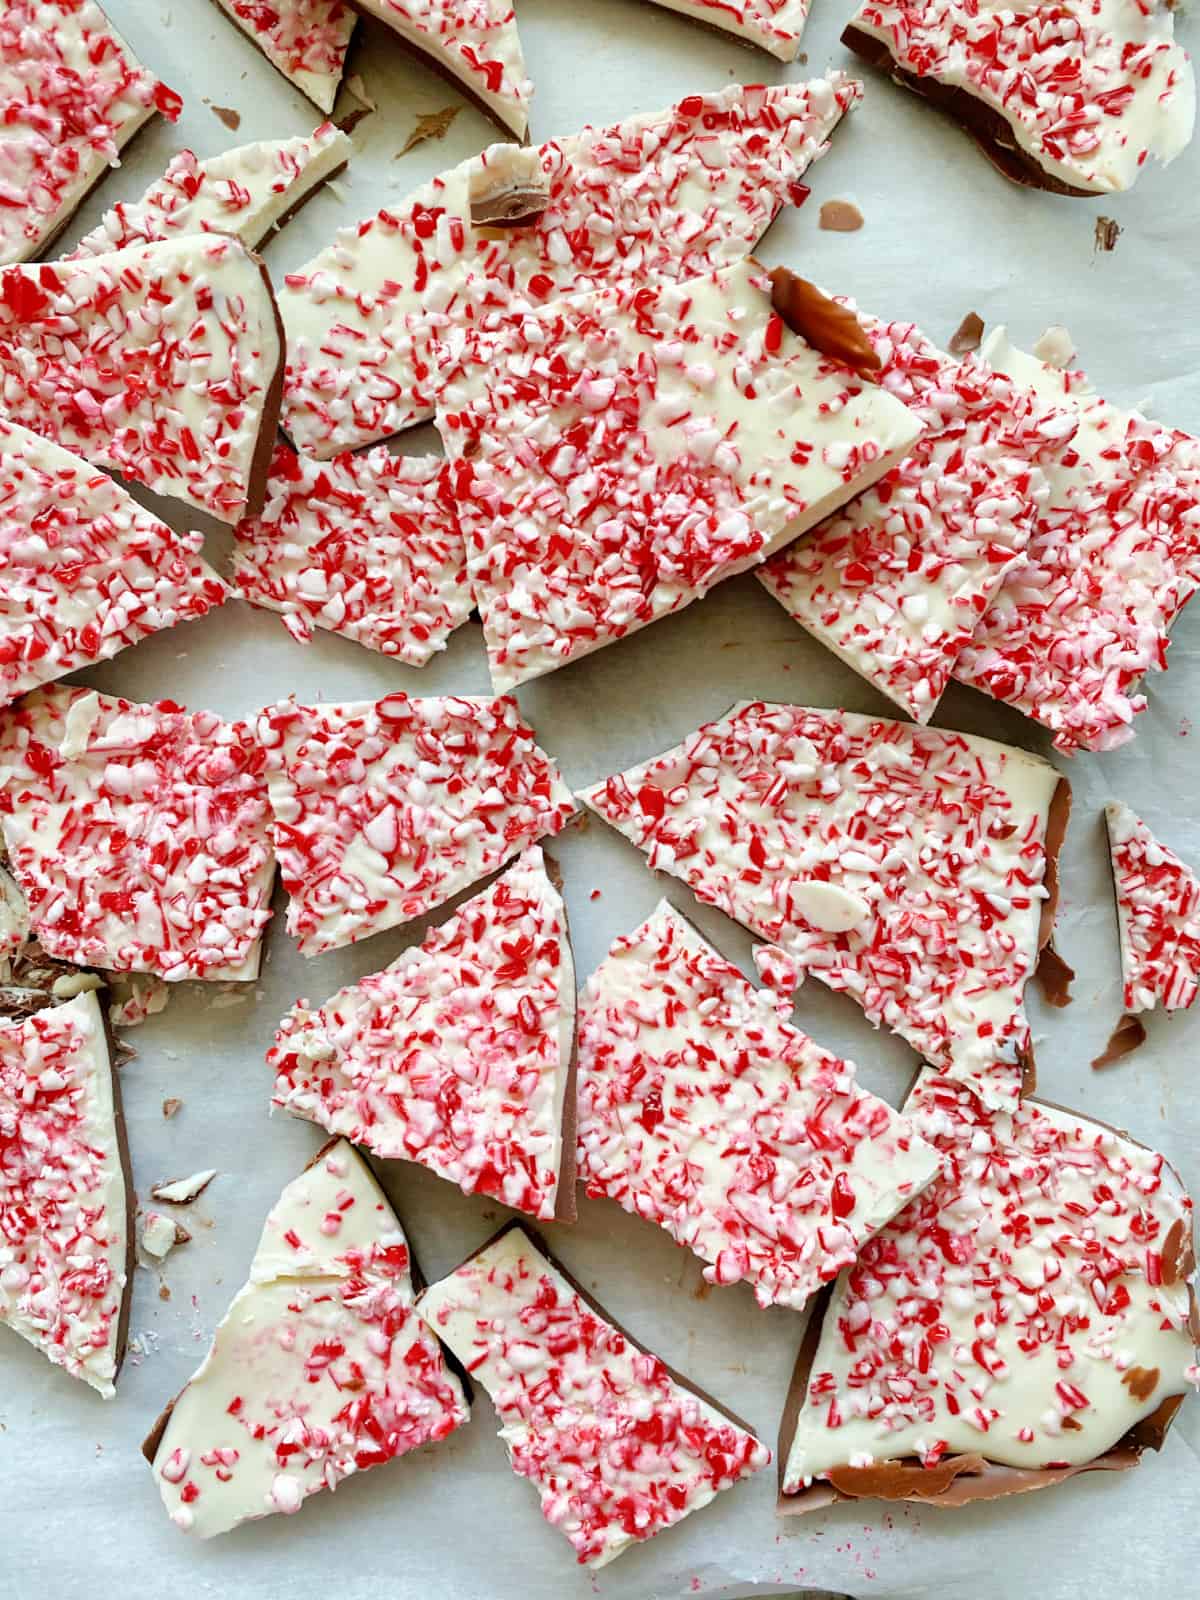 Close up of chopped Peppermint Bark on white paper.